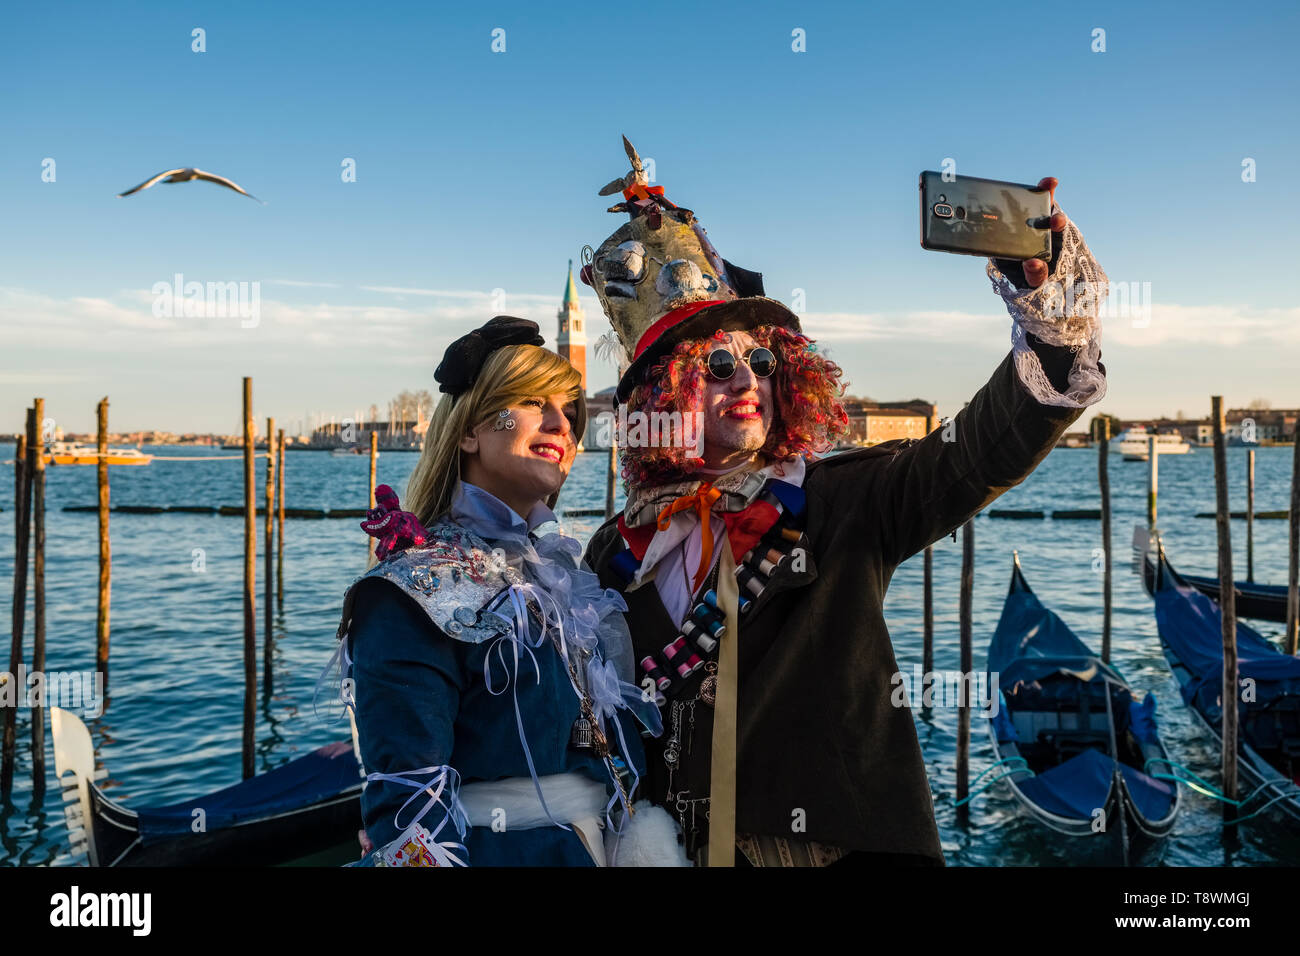 Two masked and costumed people are taking a selfie with a mobile phone at the Grand Canal, Canal Grande, celebrating the Venetian Carnival Stock Photo